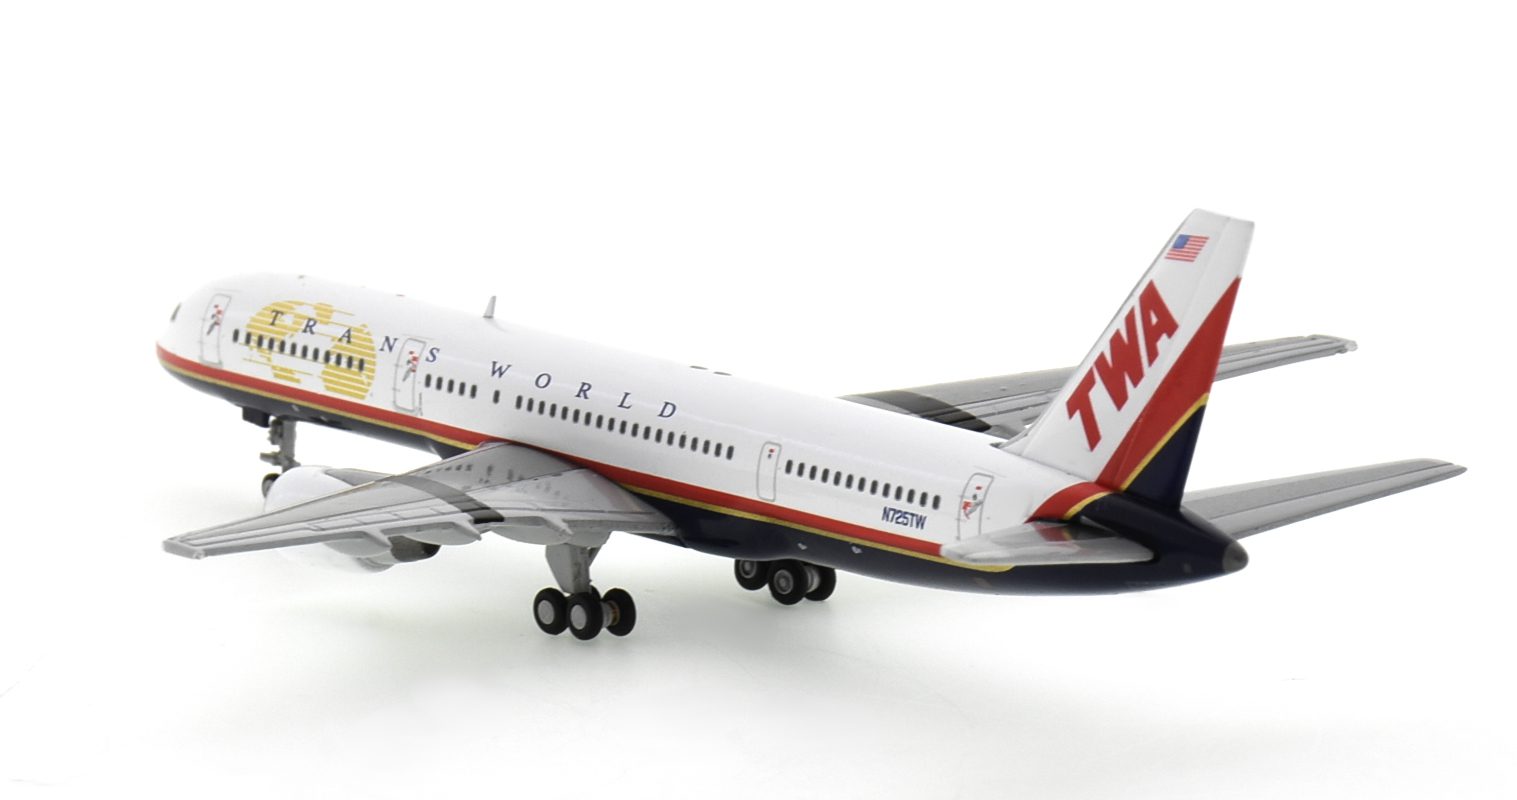 Rear view of Gemini Jets GJTWA1982 - 1/200 scale diecast model of the Boeing 757-200 registration N725TW in TWA's final livery, circa 2000.